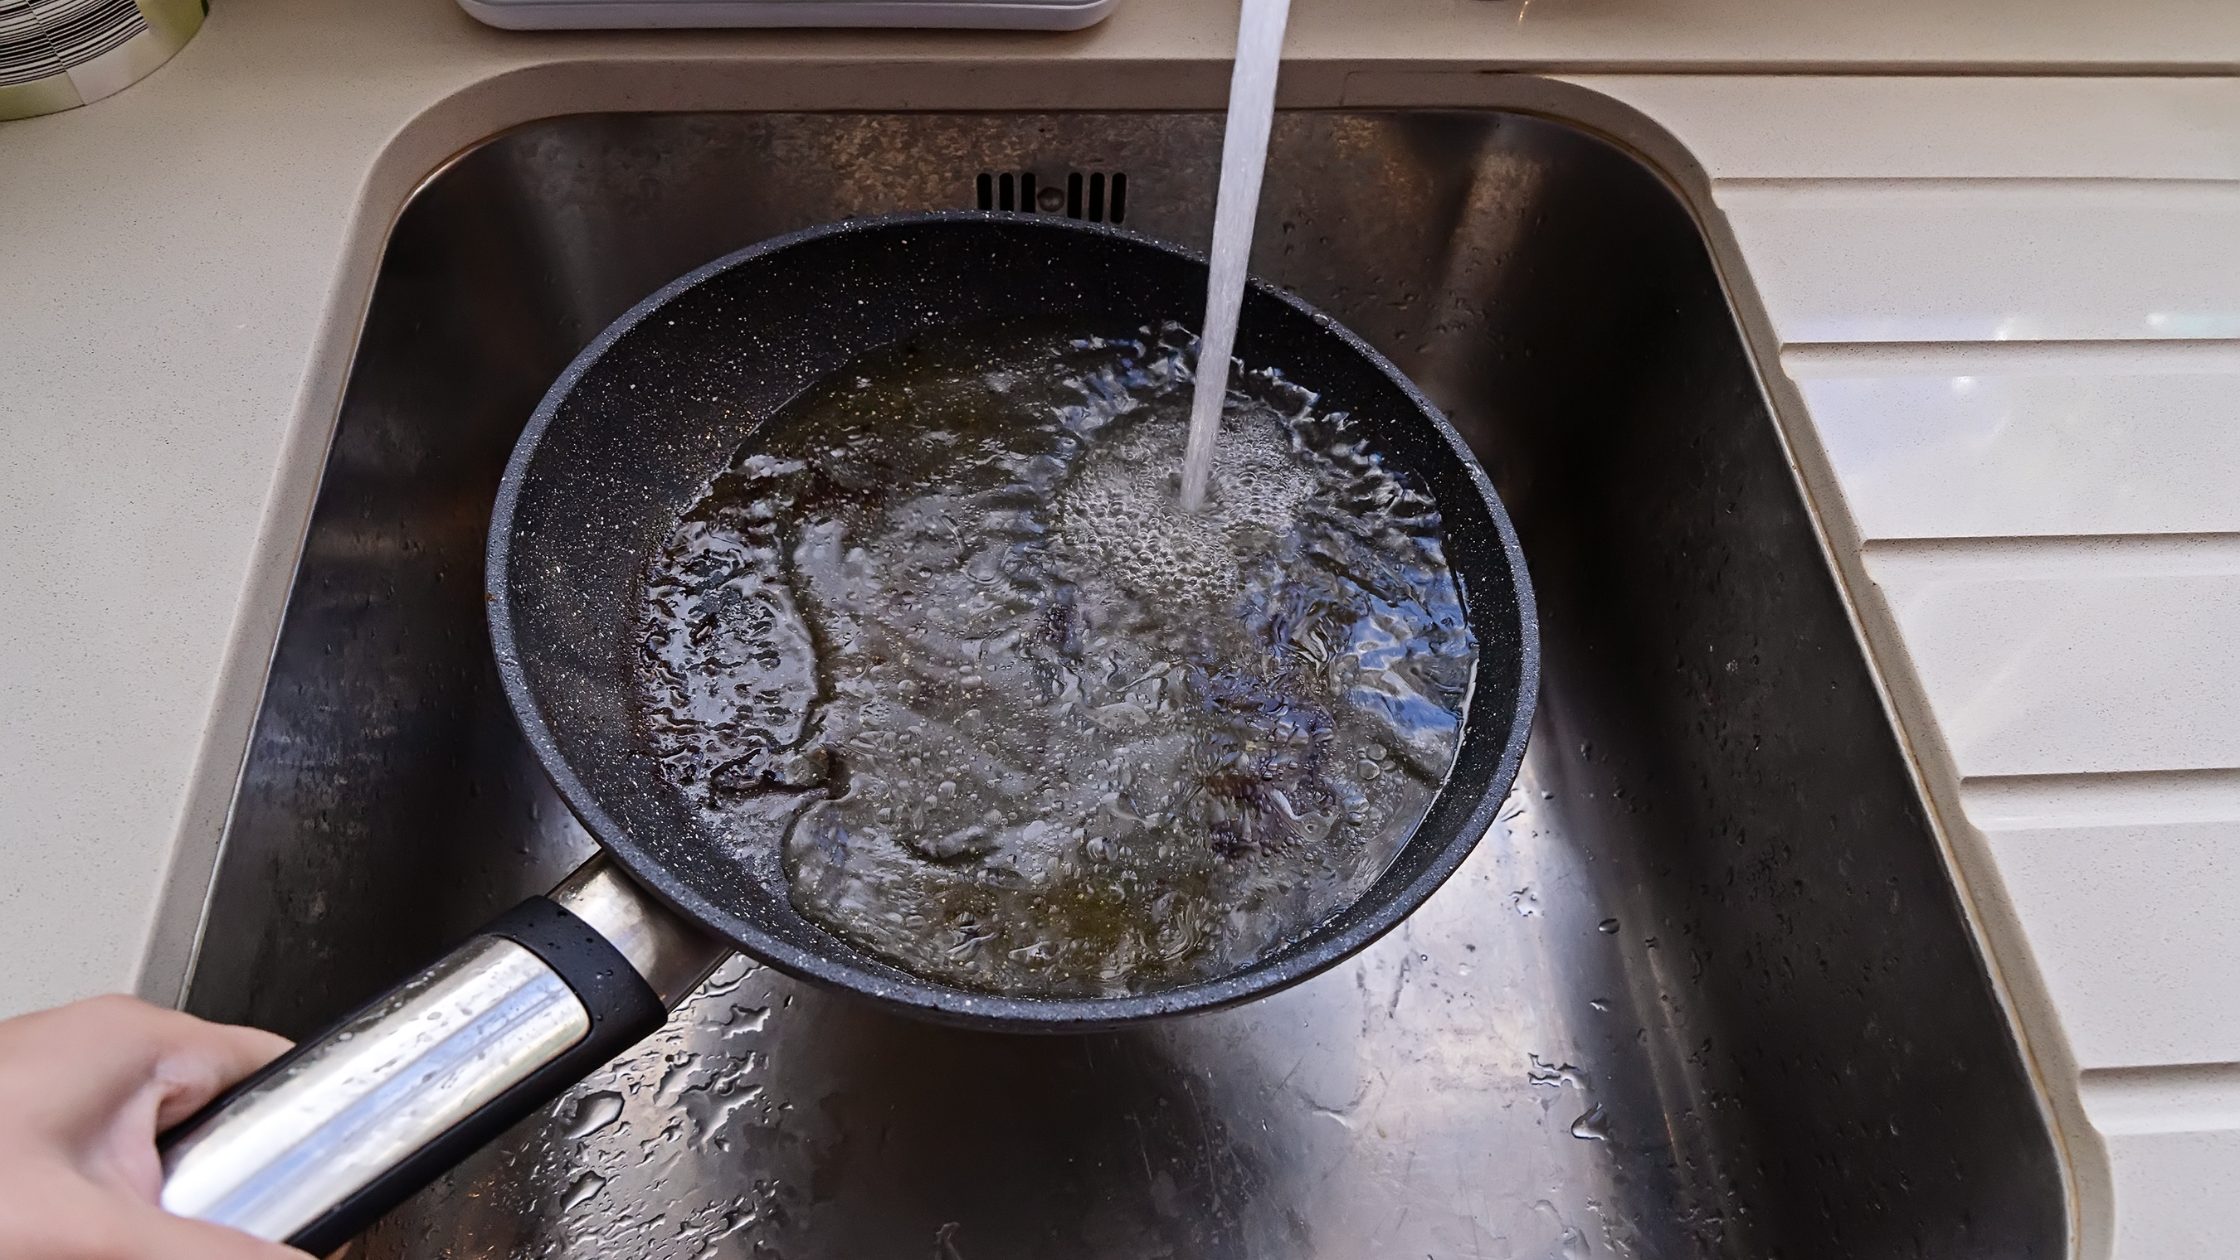 greasy pan being washed in sink